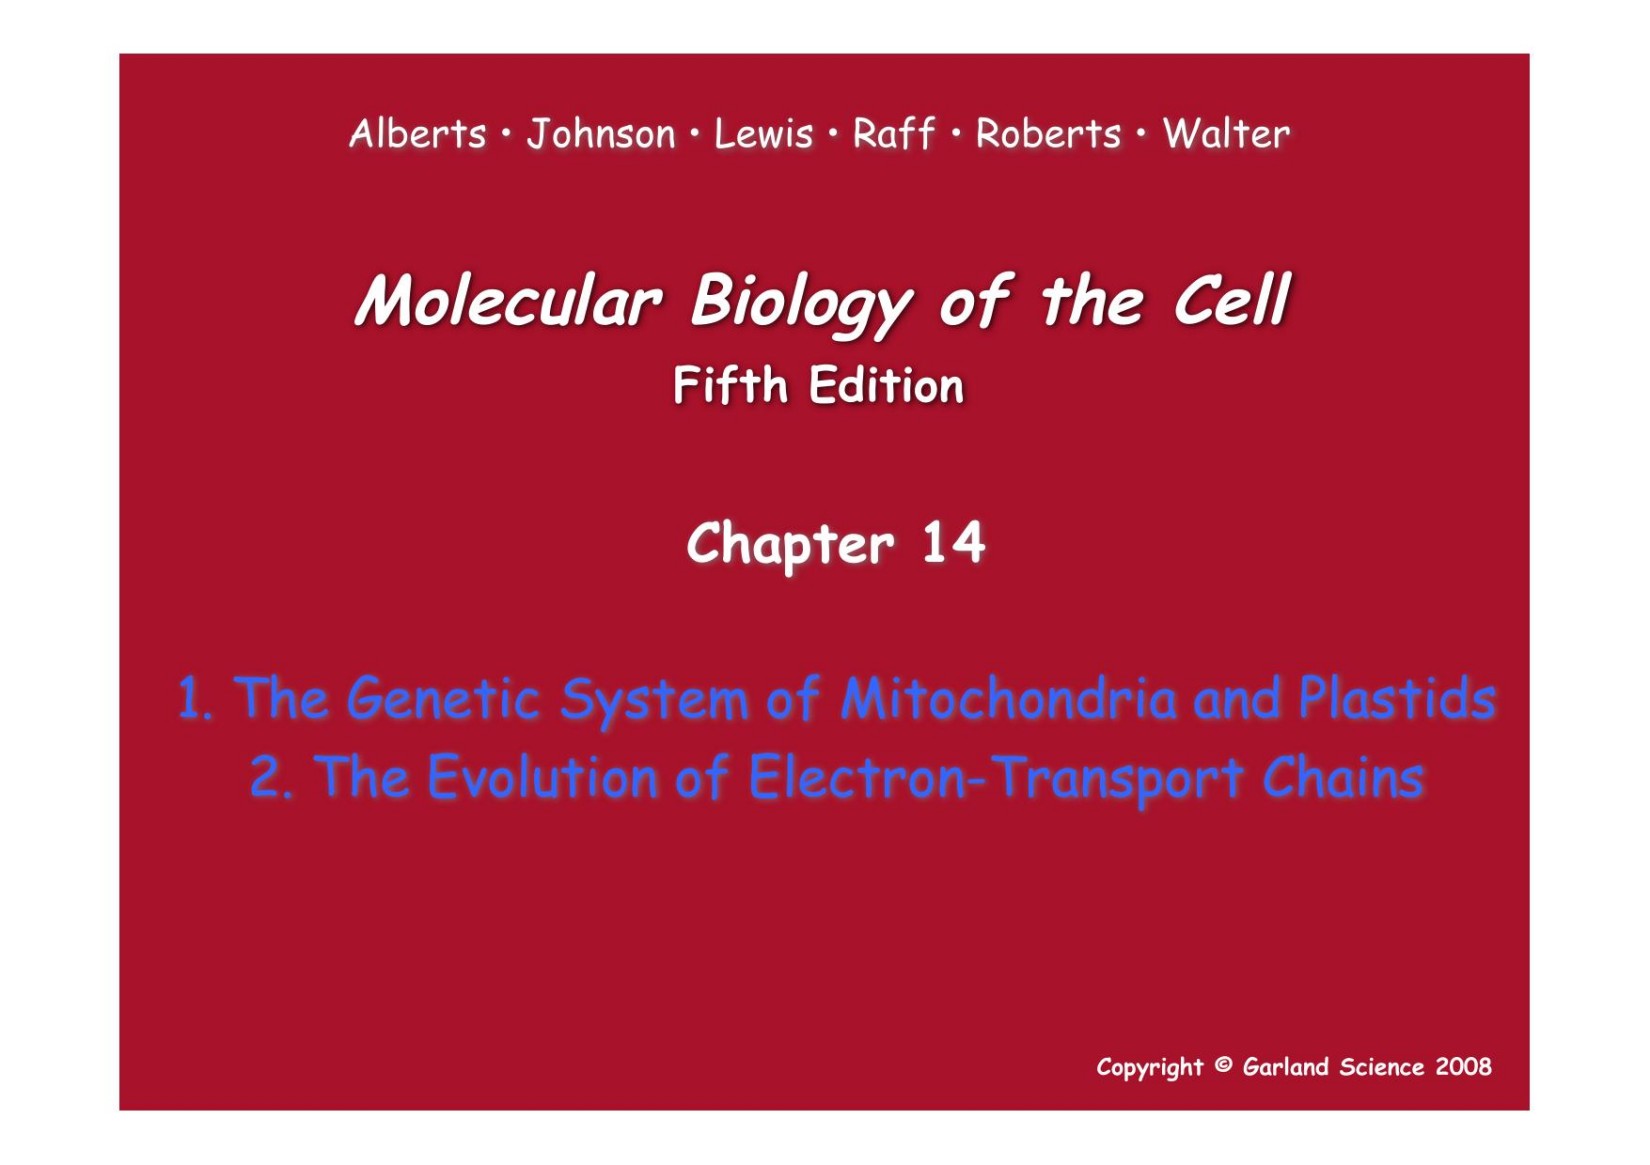 mitochondria Chapter 14b.ppt